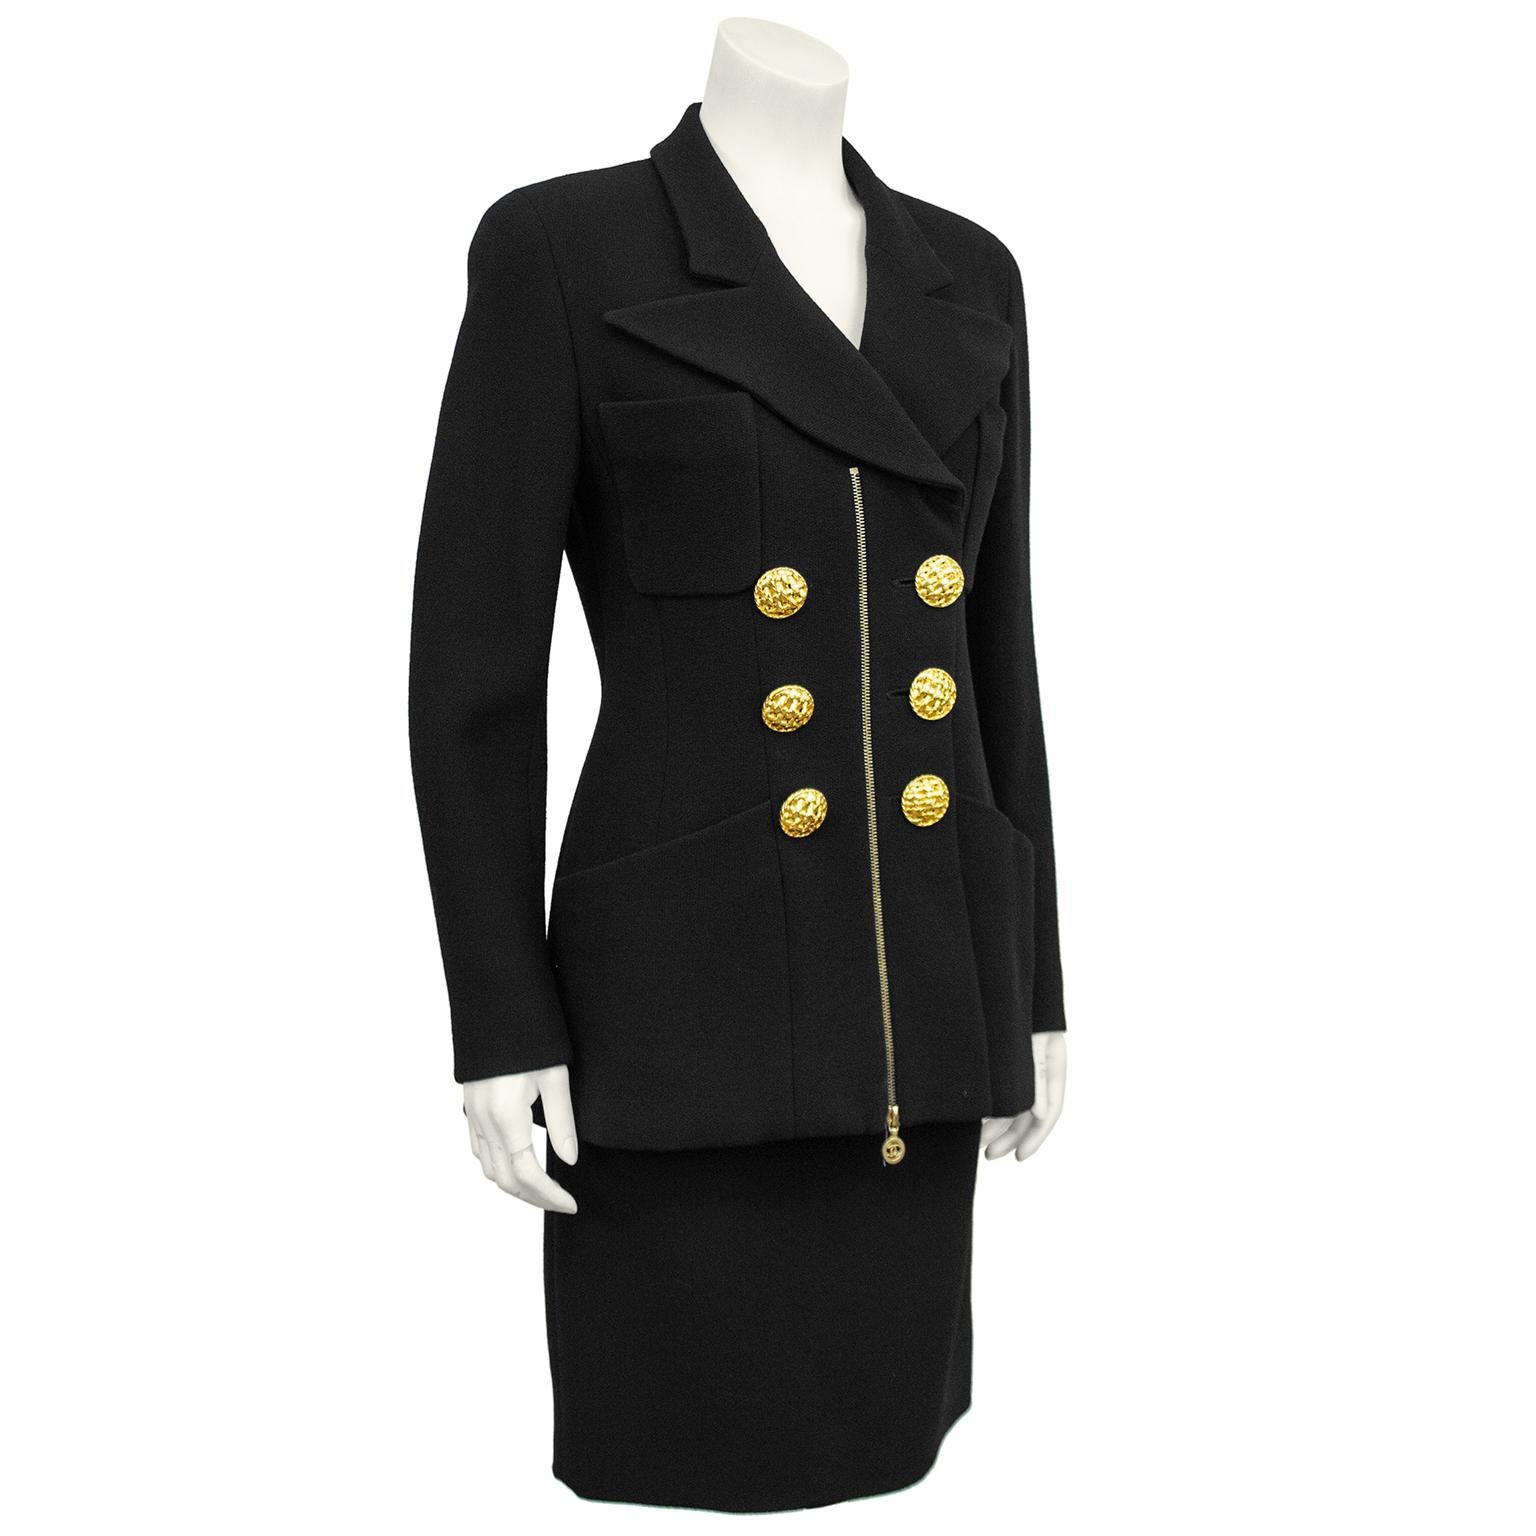 1990s Chanel black wool skirt suit. Double breasted jacket features an exaggerated collar, large woven gilt metal buttons, two small and two large patch pockets and a centre gold zipper. Zipper opens from bottom and can allow for a little more room